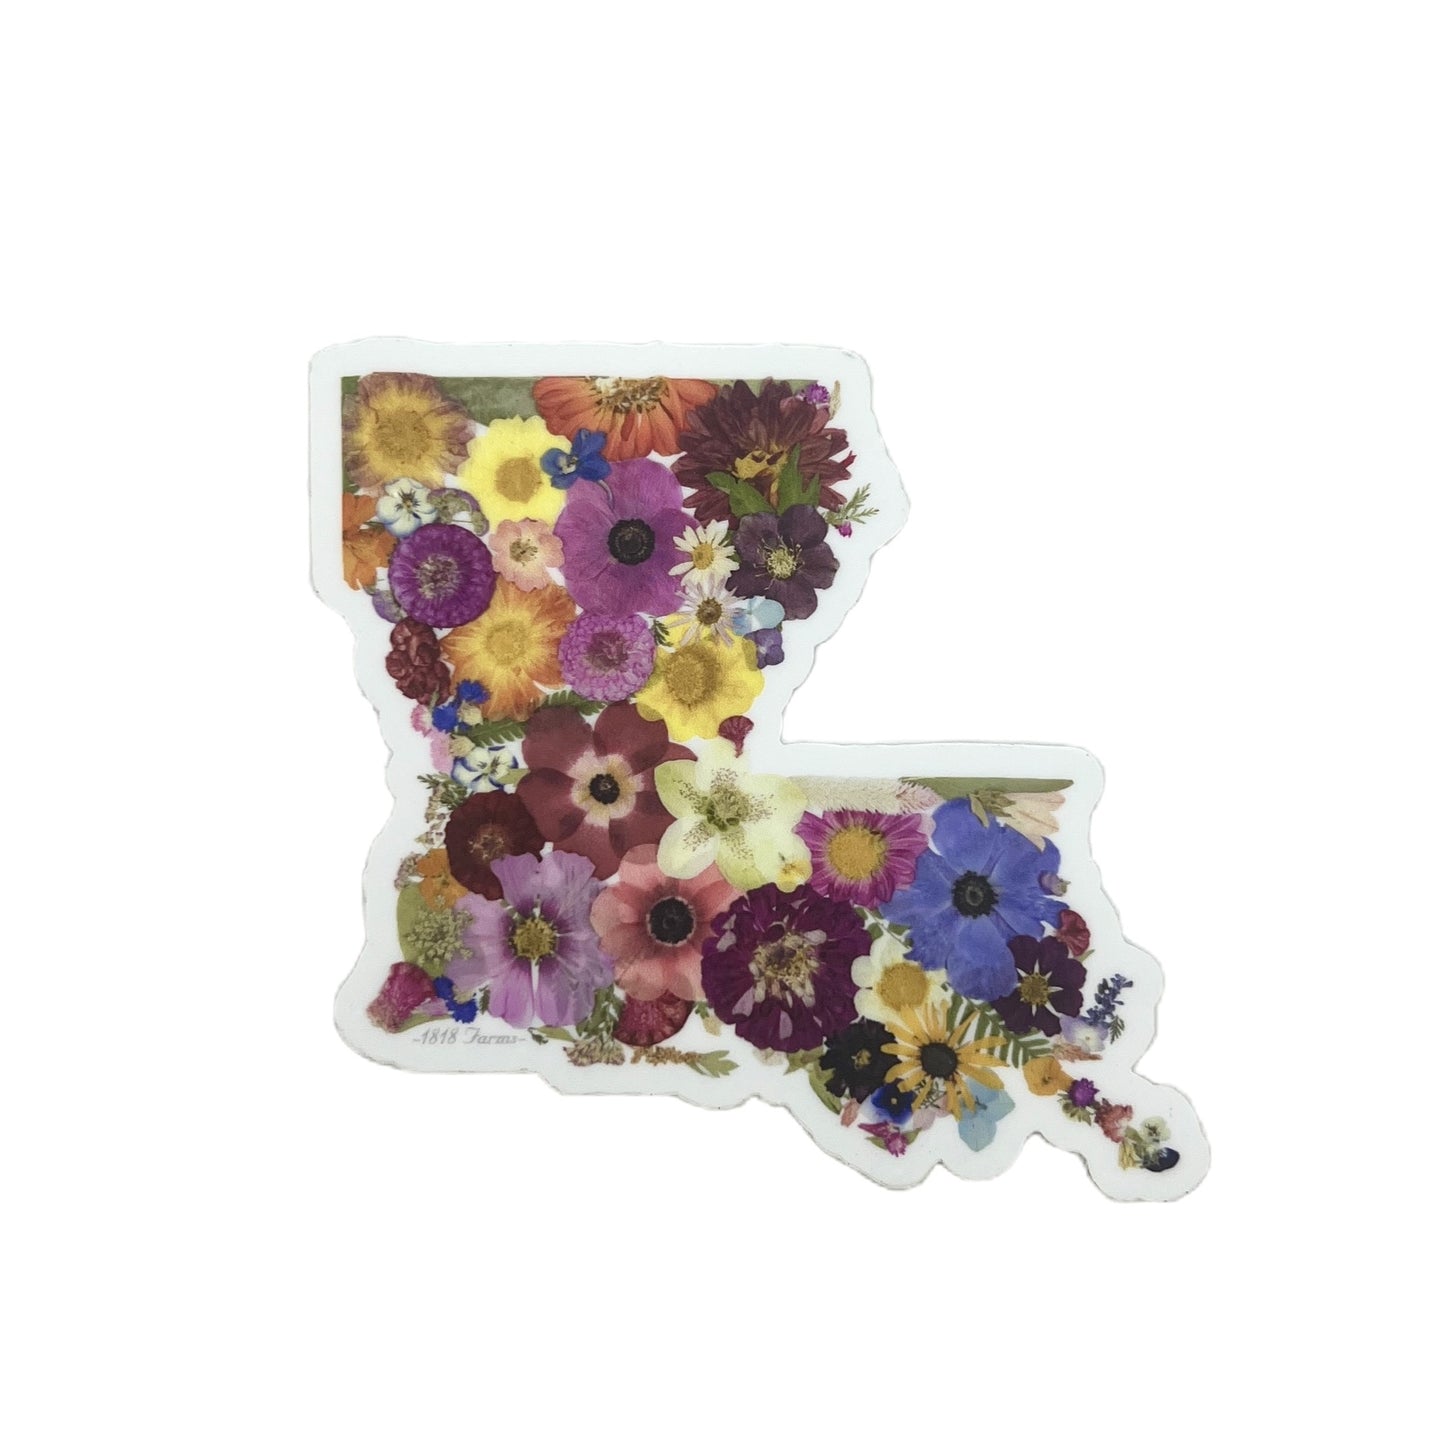 Louisiana Themed Vinyl Sticker Featuring Dried, Pressed Flowers - "Where I Bloom" Collection Vinyl Sticker 1818 Farms   